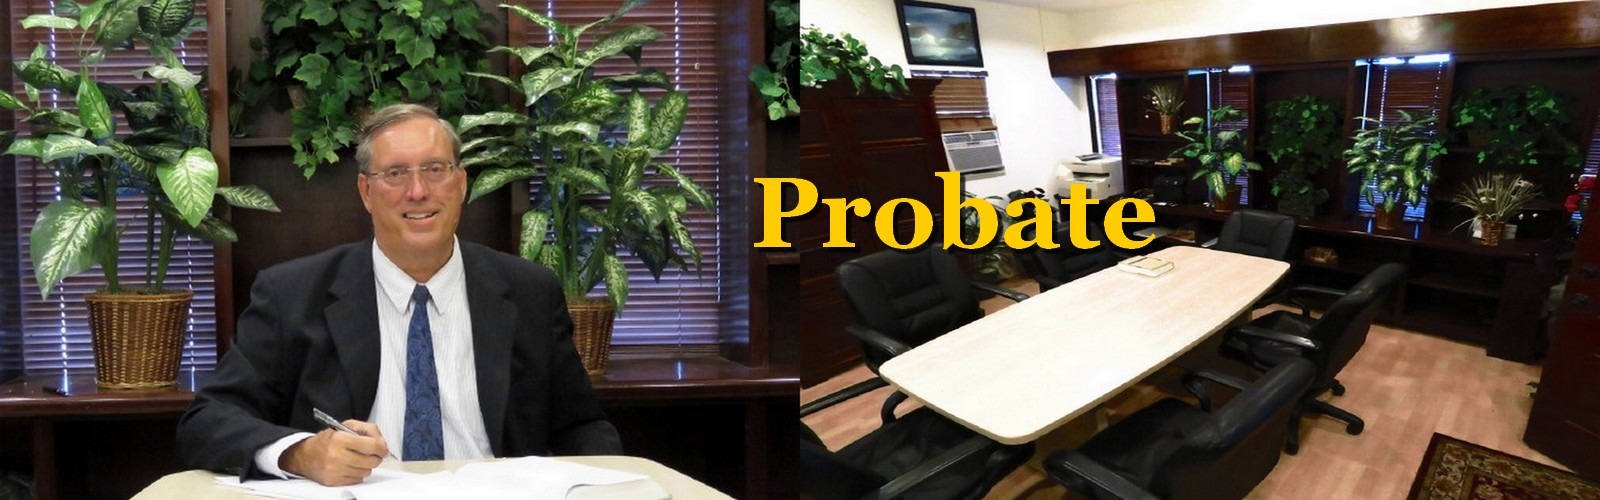 Herbert L. Allen, Jr., P.A., Probate Attorney, LawFloridaProbate.com, helps people probate matters in Satellite Beach, Florida 32937 with reasonable fees and decades of experience.